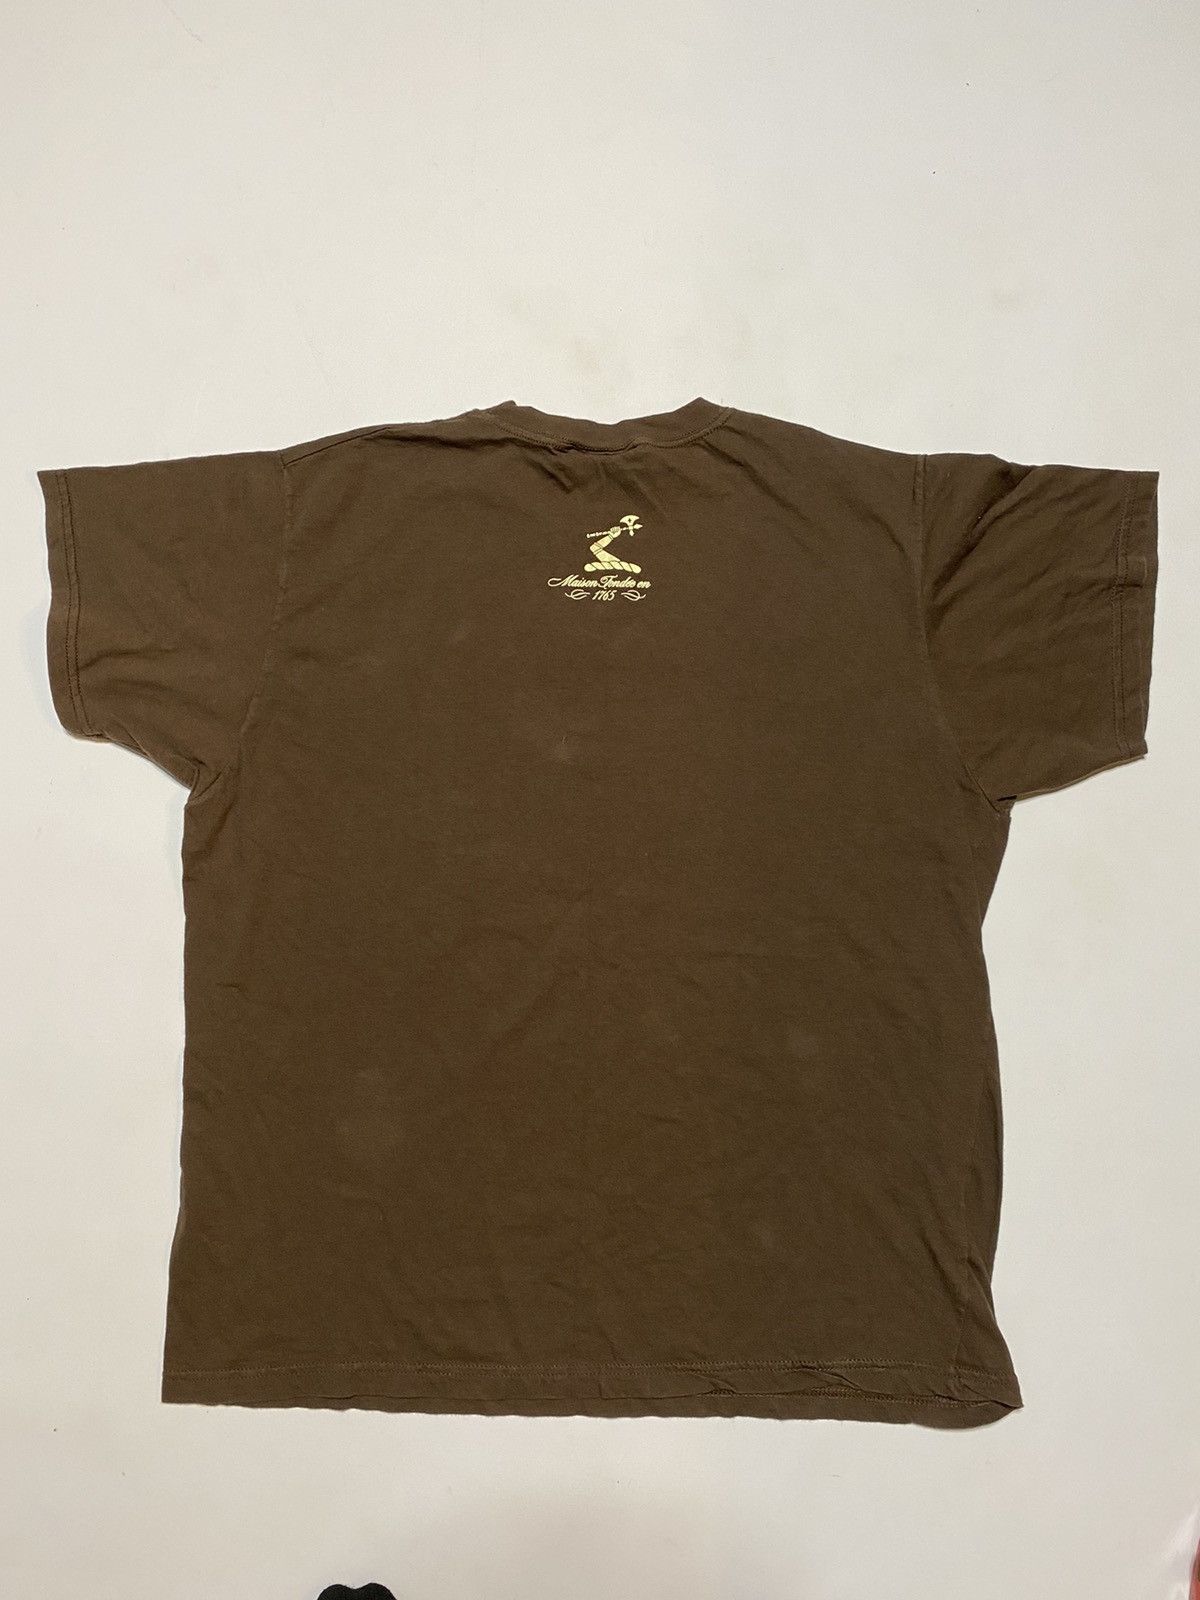 Hennessy Vintage Hennessy Cognac T Shirt Size XL Made IN USA Size US XL / EU 56 / 4 - 5 Thumbnail